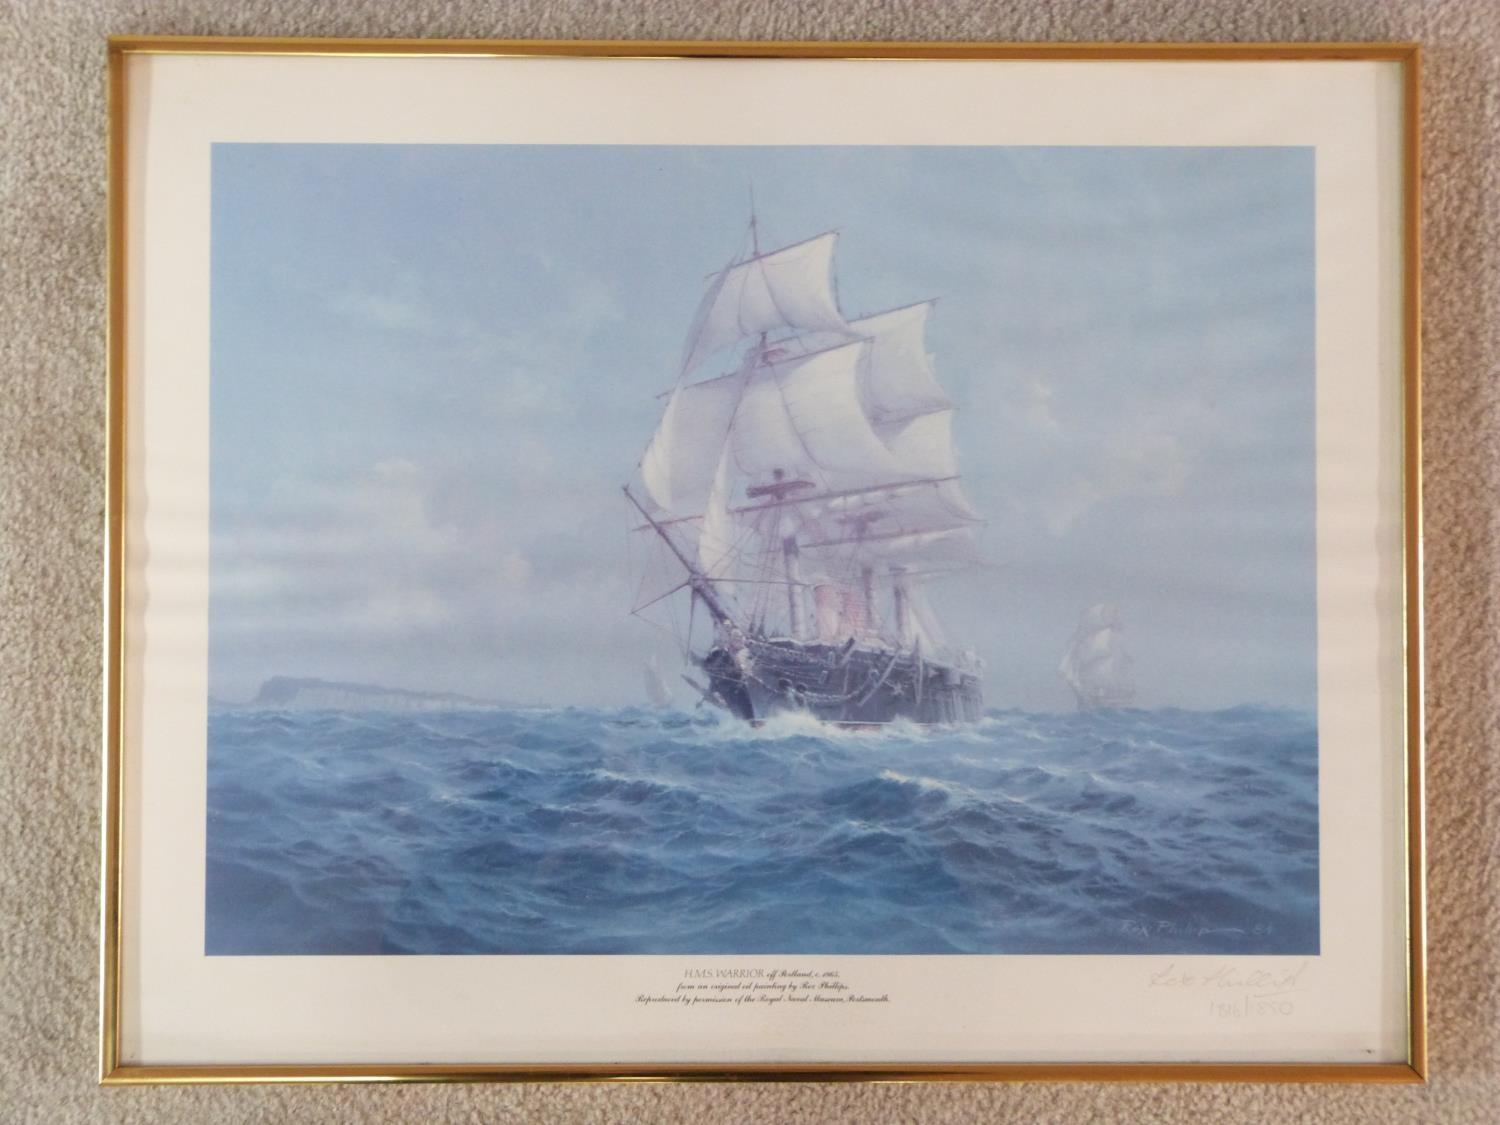 A framed and glazed print of H.M.S. Warrior by Rex Phillips, limited edition signed by the artist. - Image 2 of 5